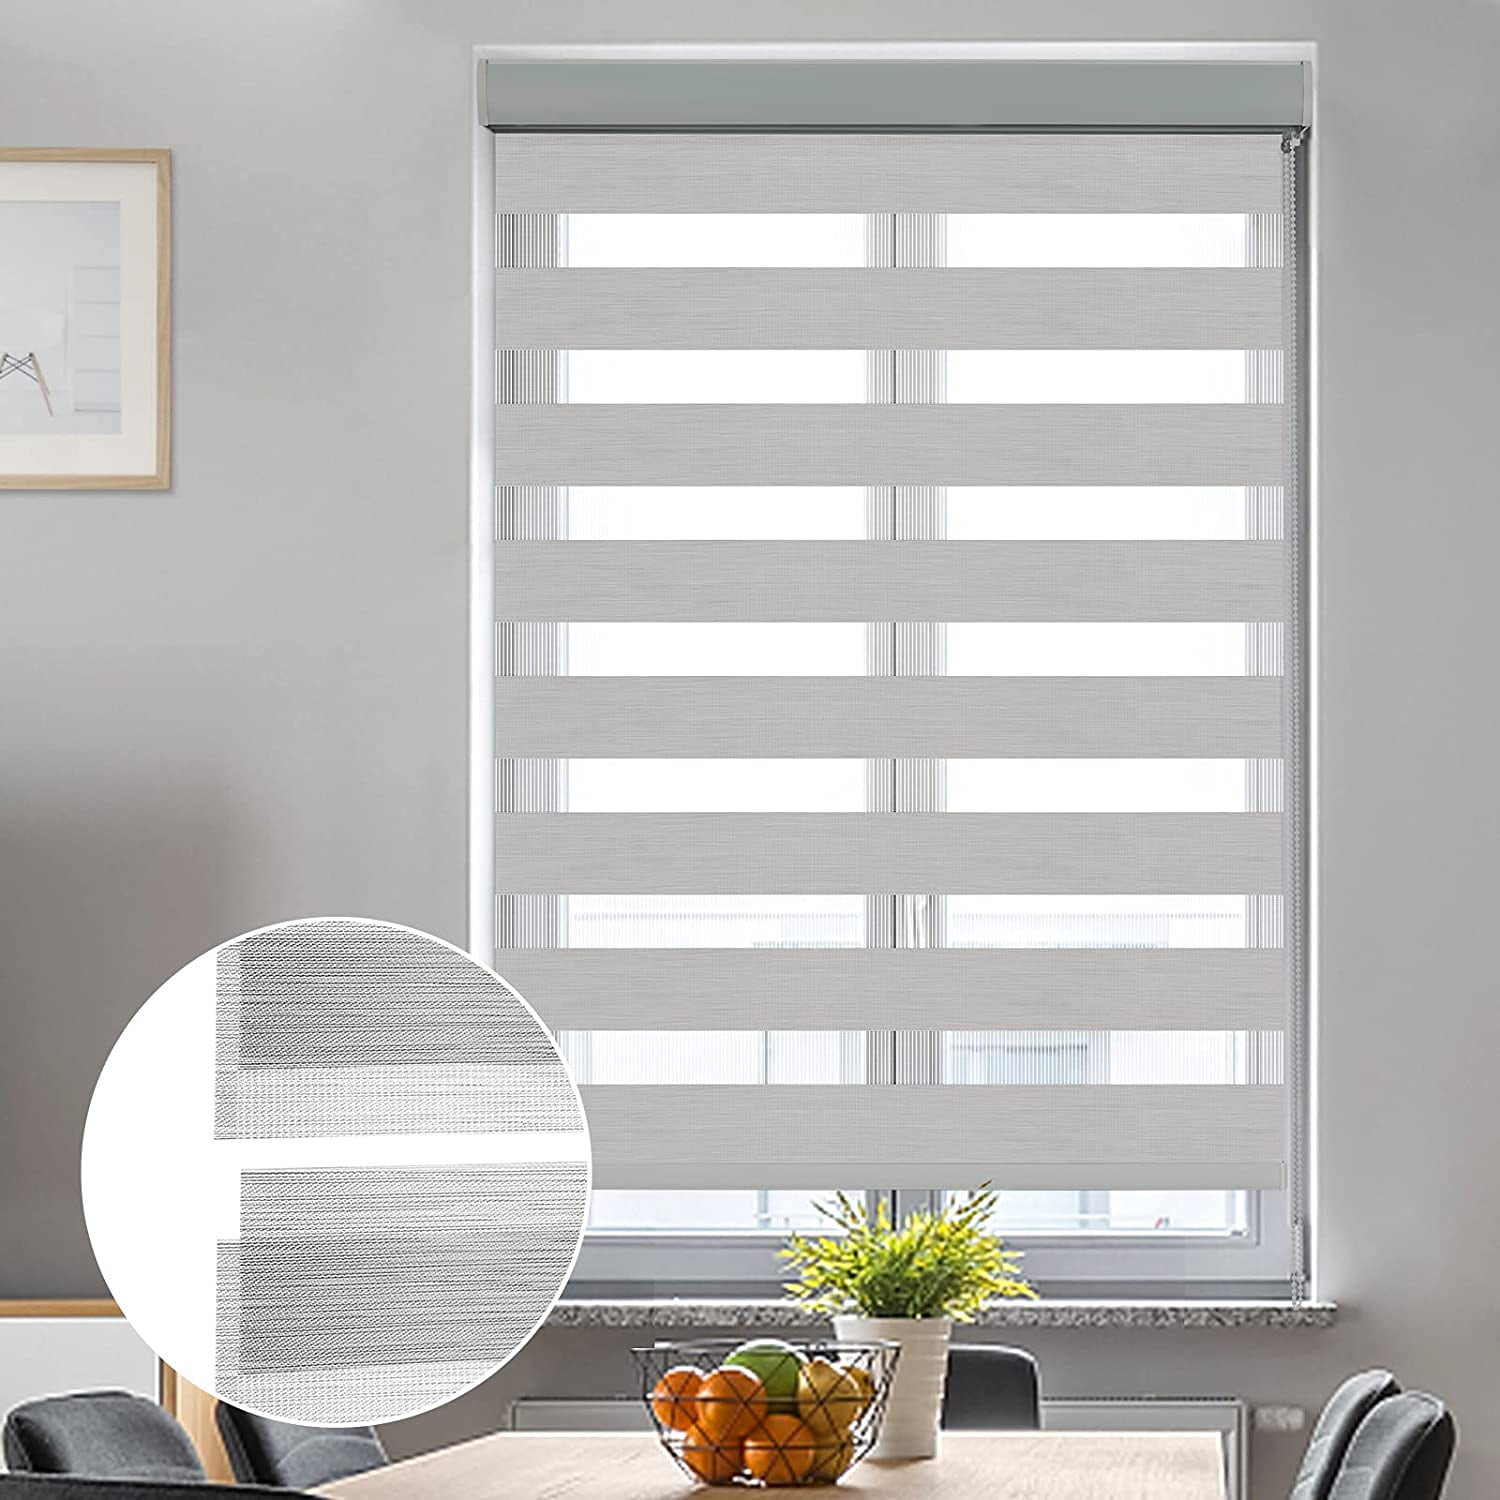 39 W X 72 H-White LUCKUP Zebra Blinds for Window Dual Roller Shades with Valance Cover Day and Night Curtains 